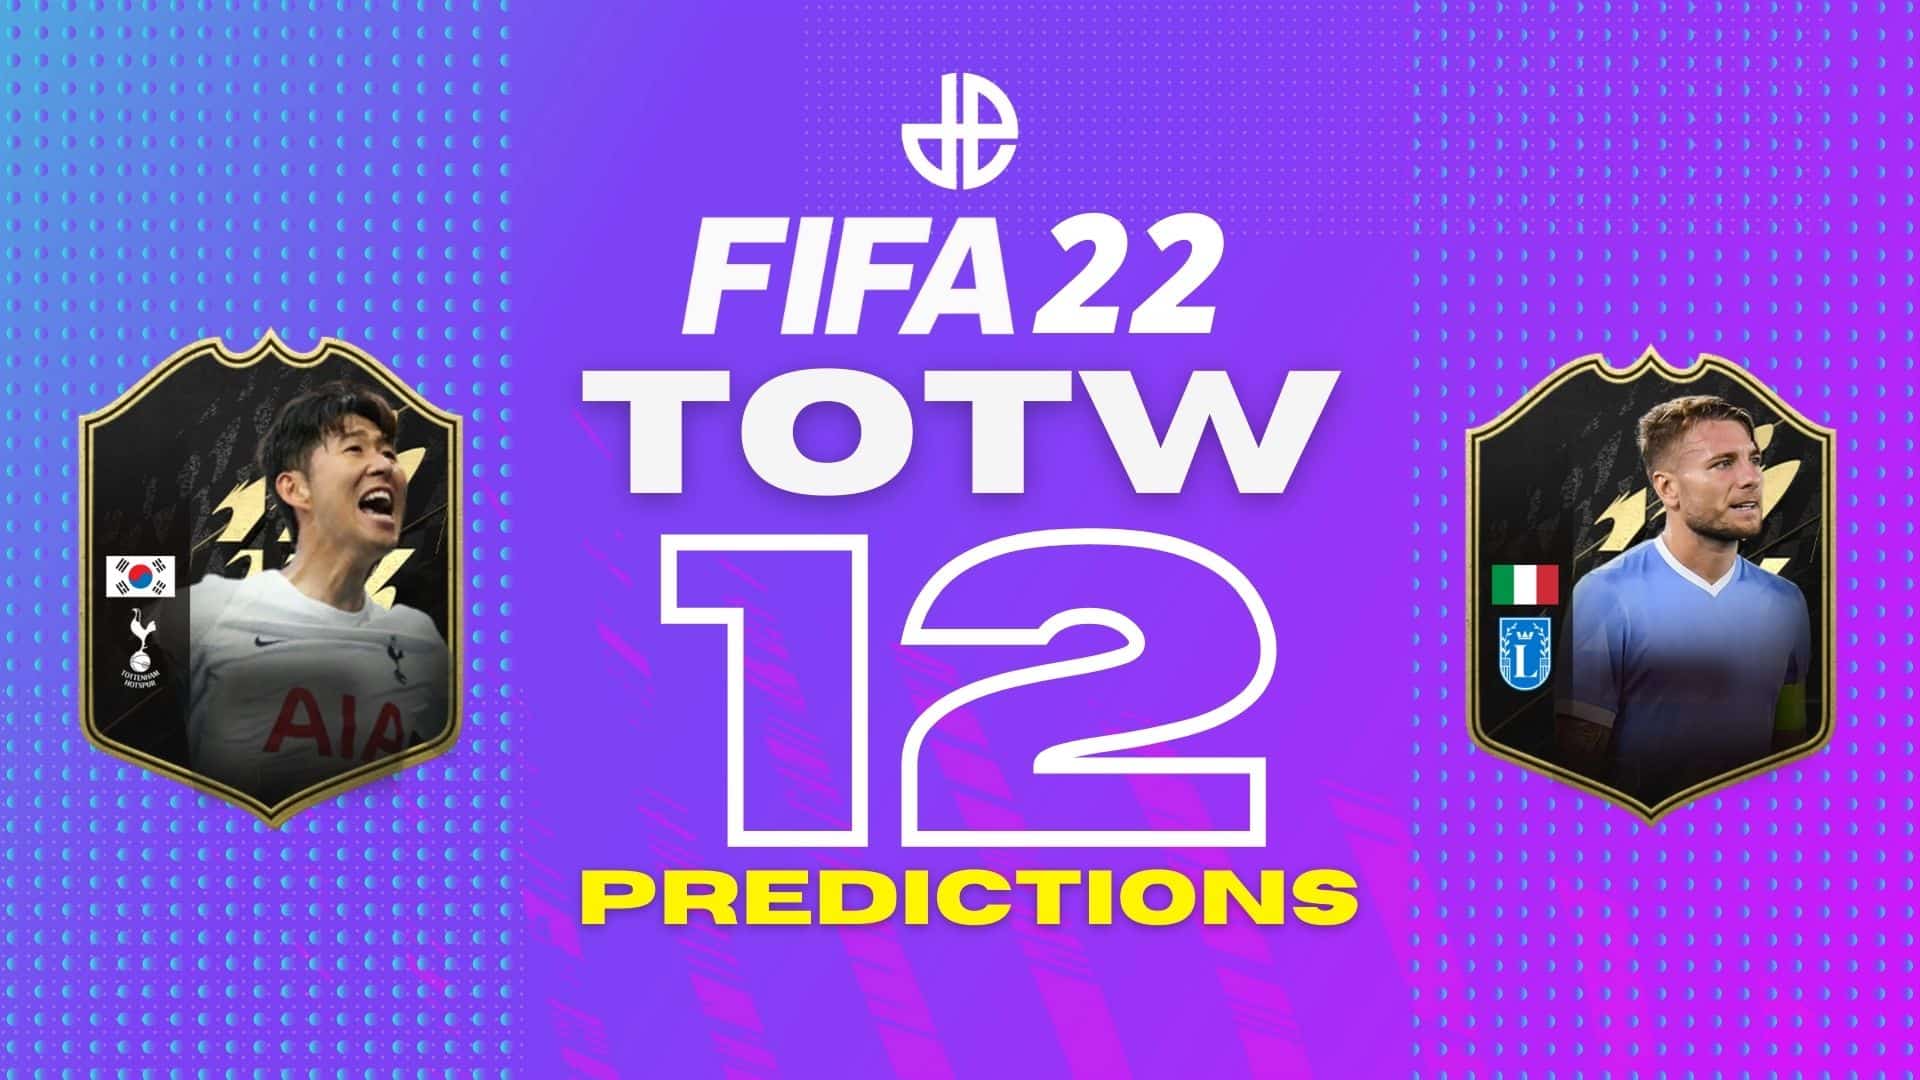 FIFA 22 TOTW 12 predictions with Son and immobile cards